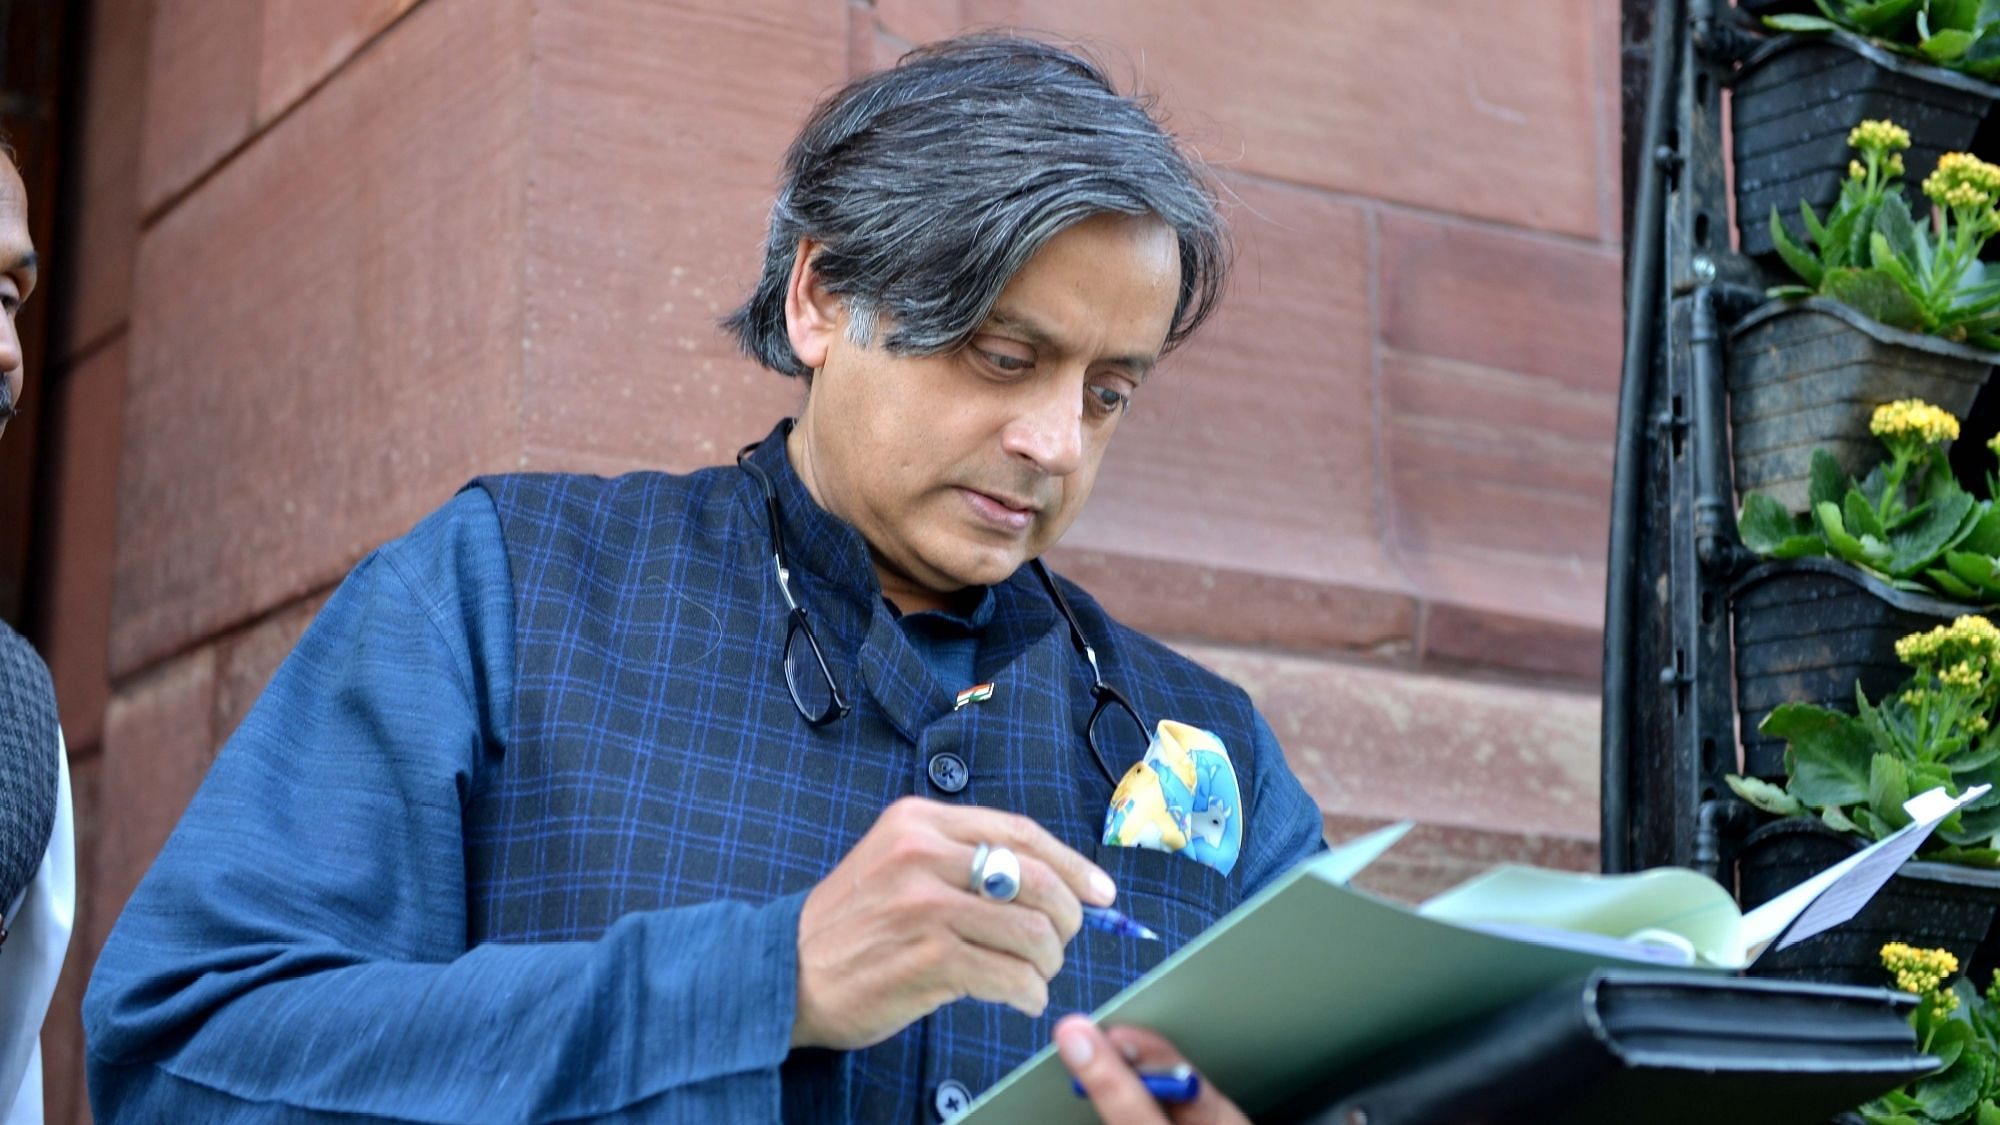 Shashi Tharoor says India played Pakistan in the World Cup at the height of the Kargil War and should not pull out of the 2019 WC fixture as well.